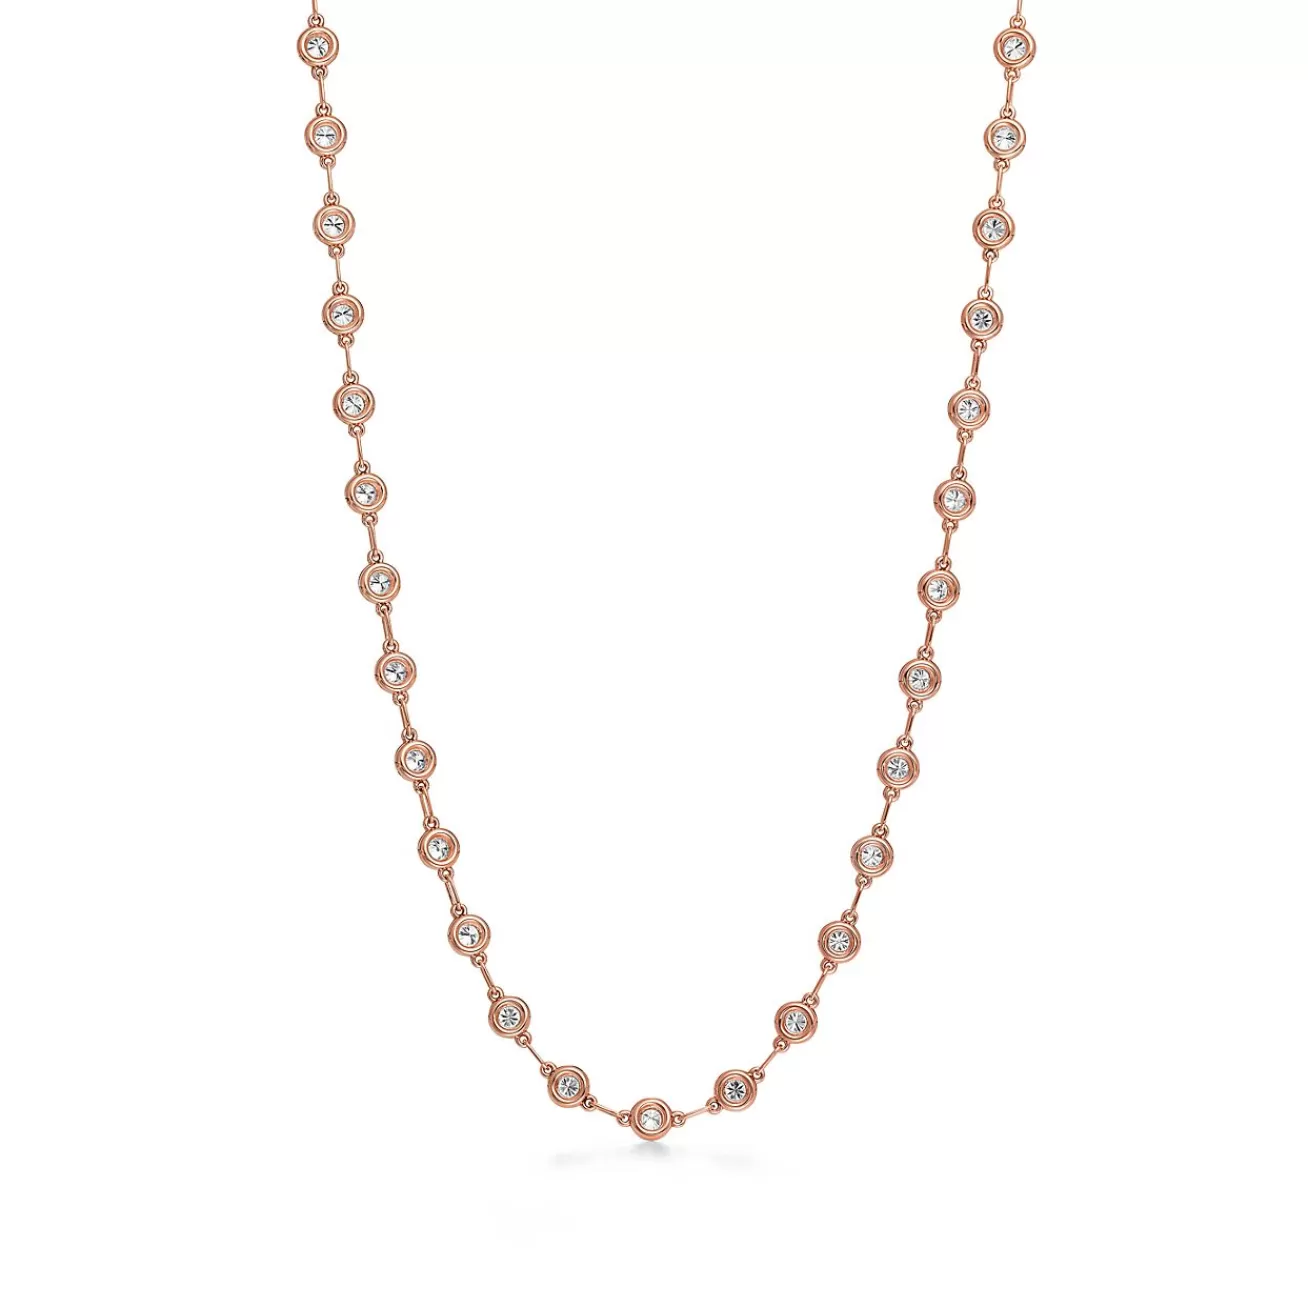 Tiffany & Co. Elsa Peretti® Diamonds by the Yard® continuous necklace in 18k rose gold. | ^ Necklaces & Pendants | Rose Gold Jewelry